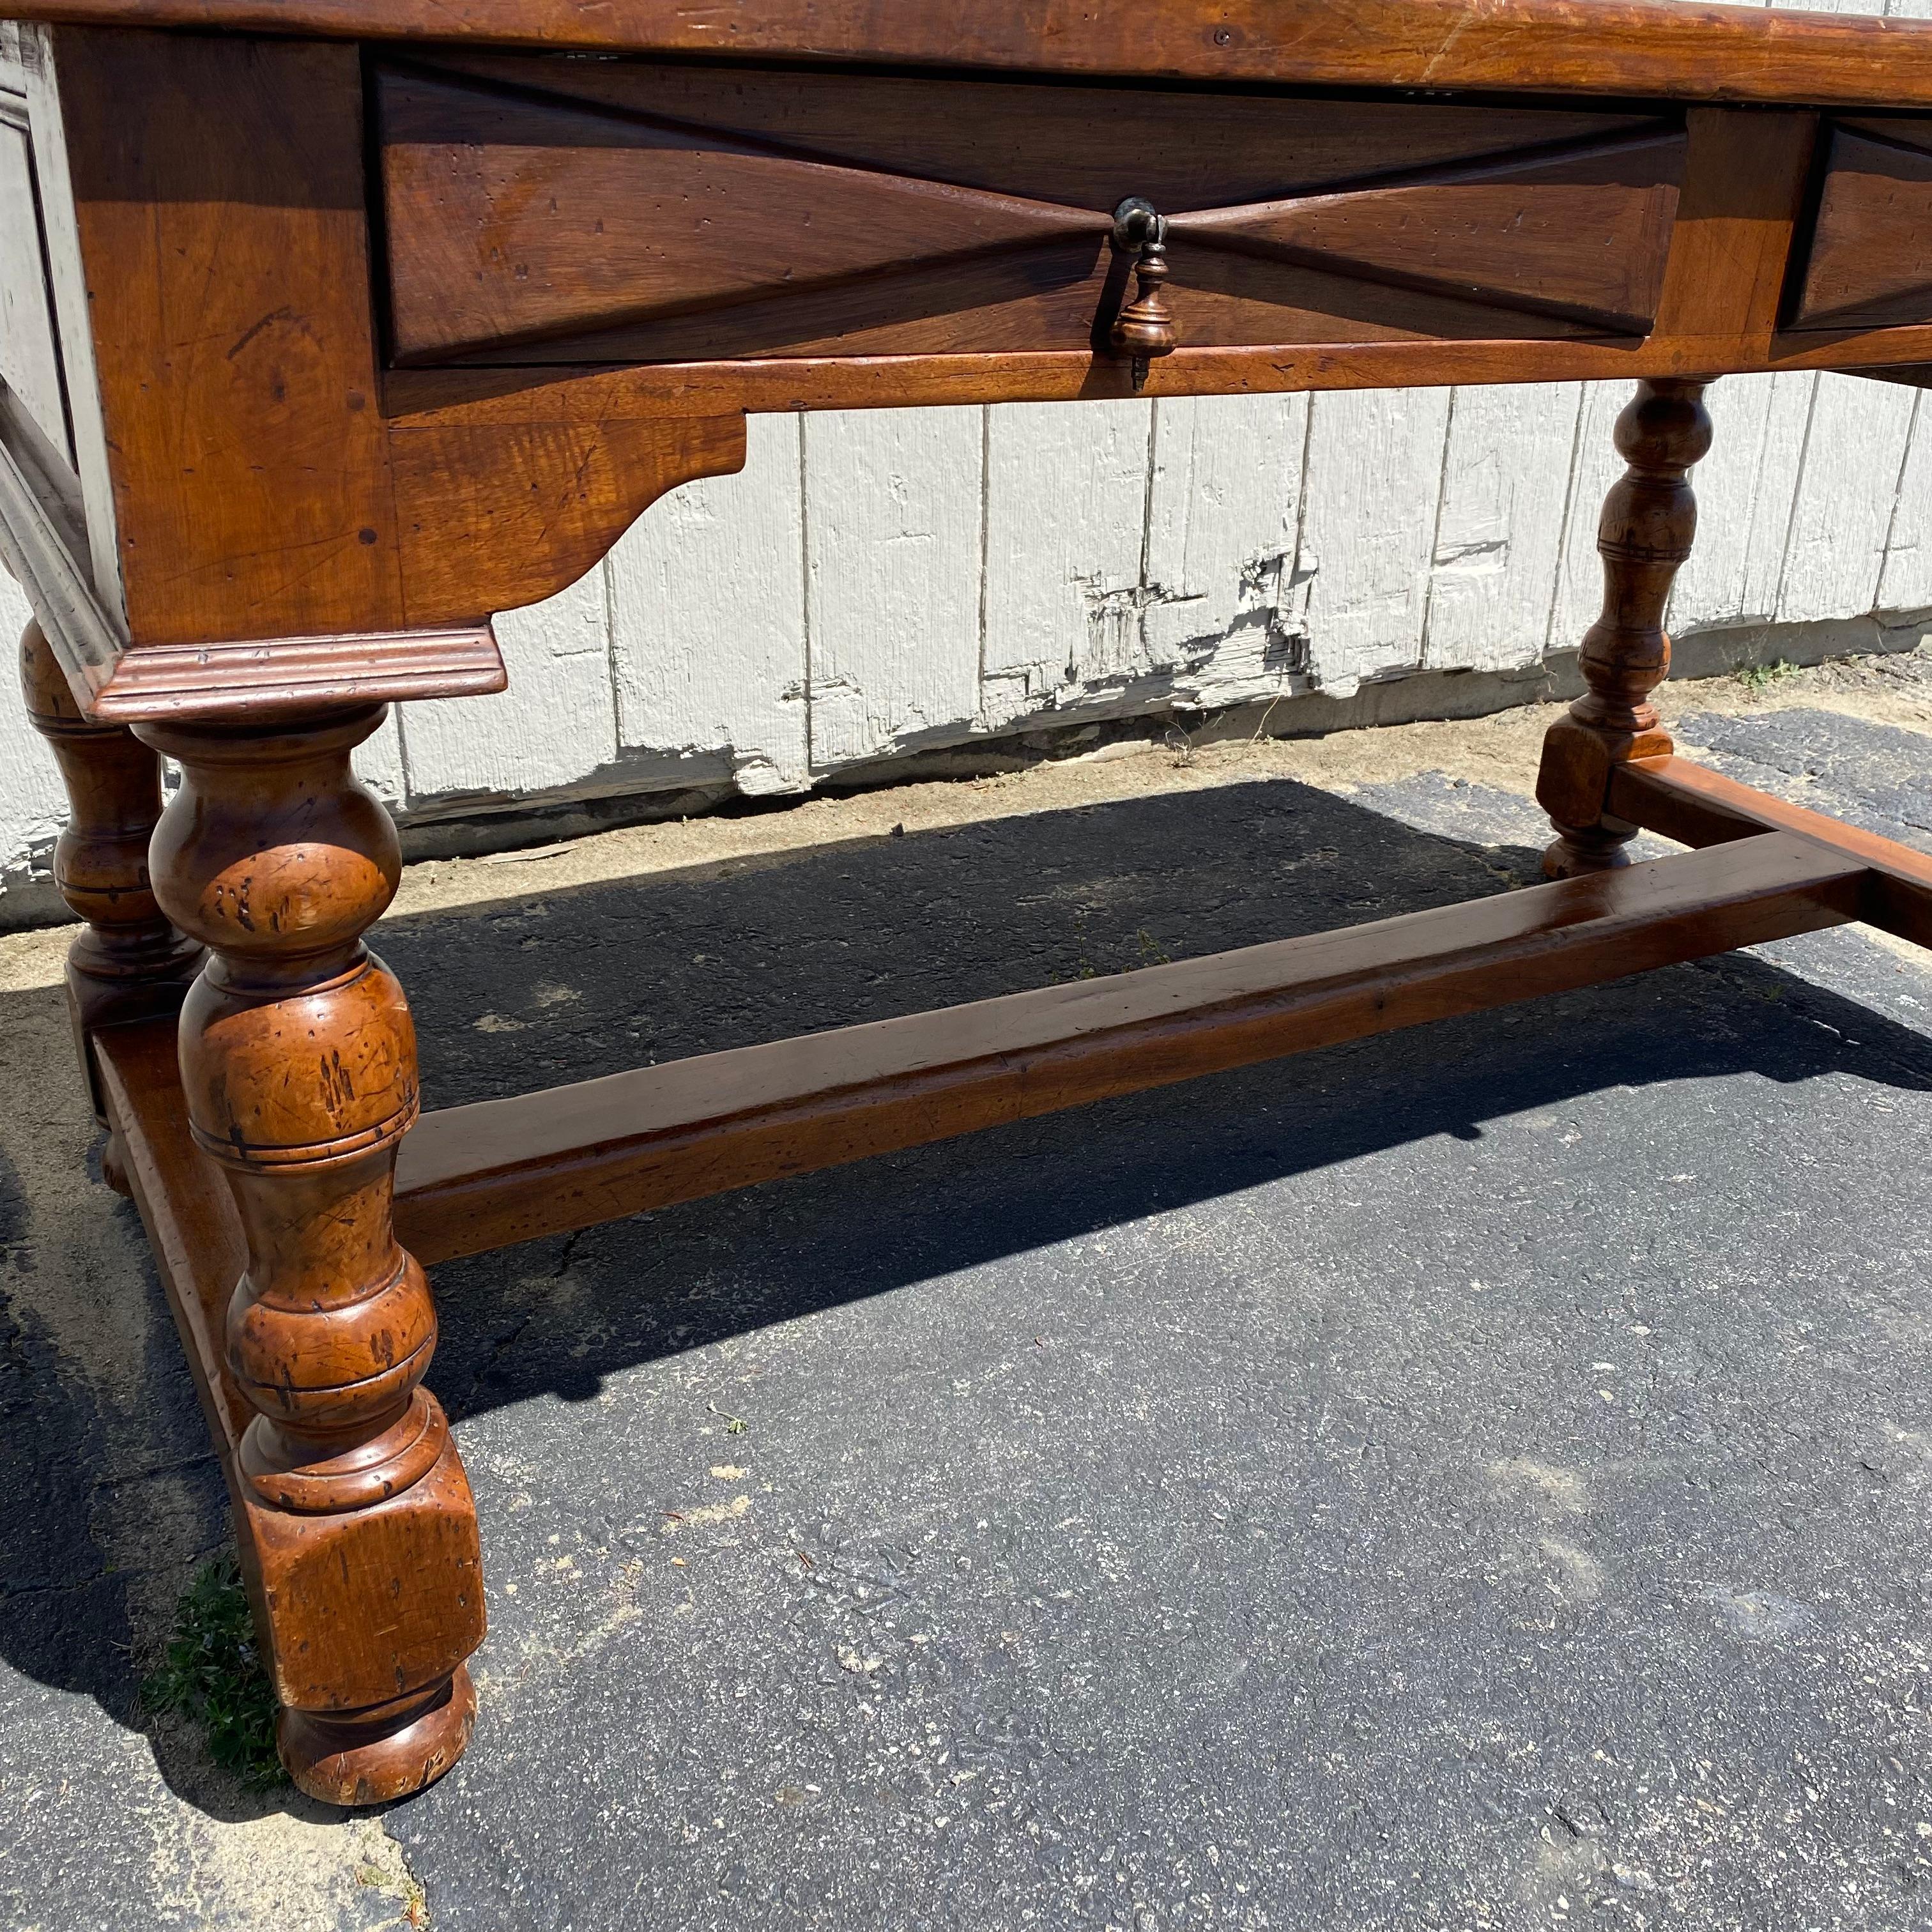 Found in the South of France, this 19th French hand carved walnut table or desk may be placed in the middle of a room as it is beautifully carved on all sides. It features a beautiful solid wooden top in a buttery camel color, over two sizeable